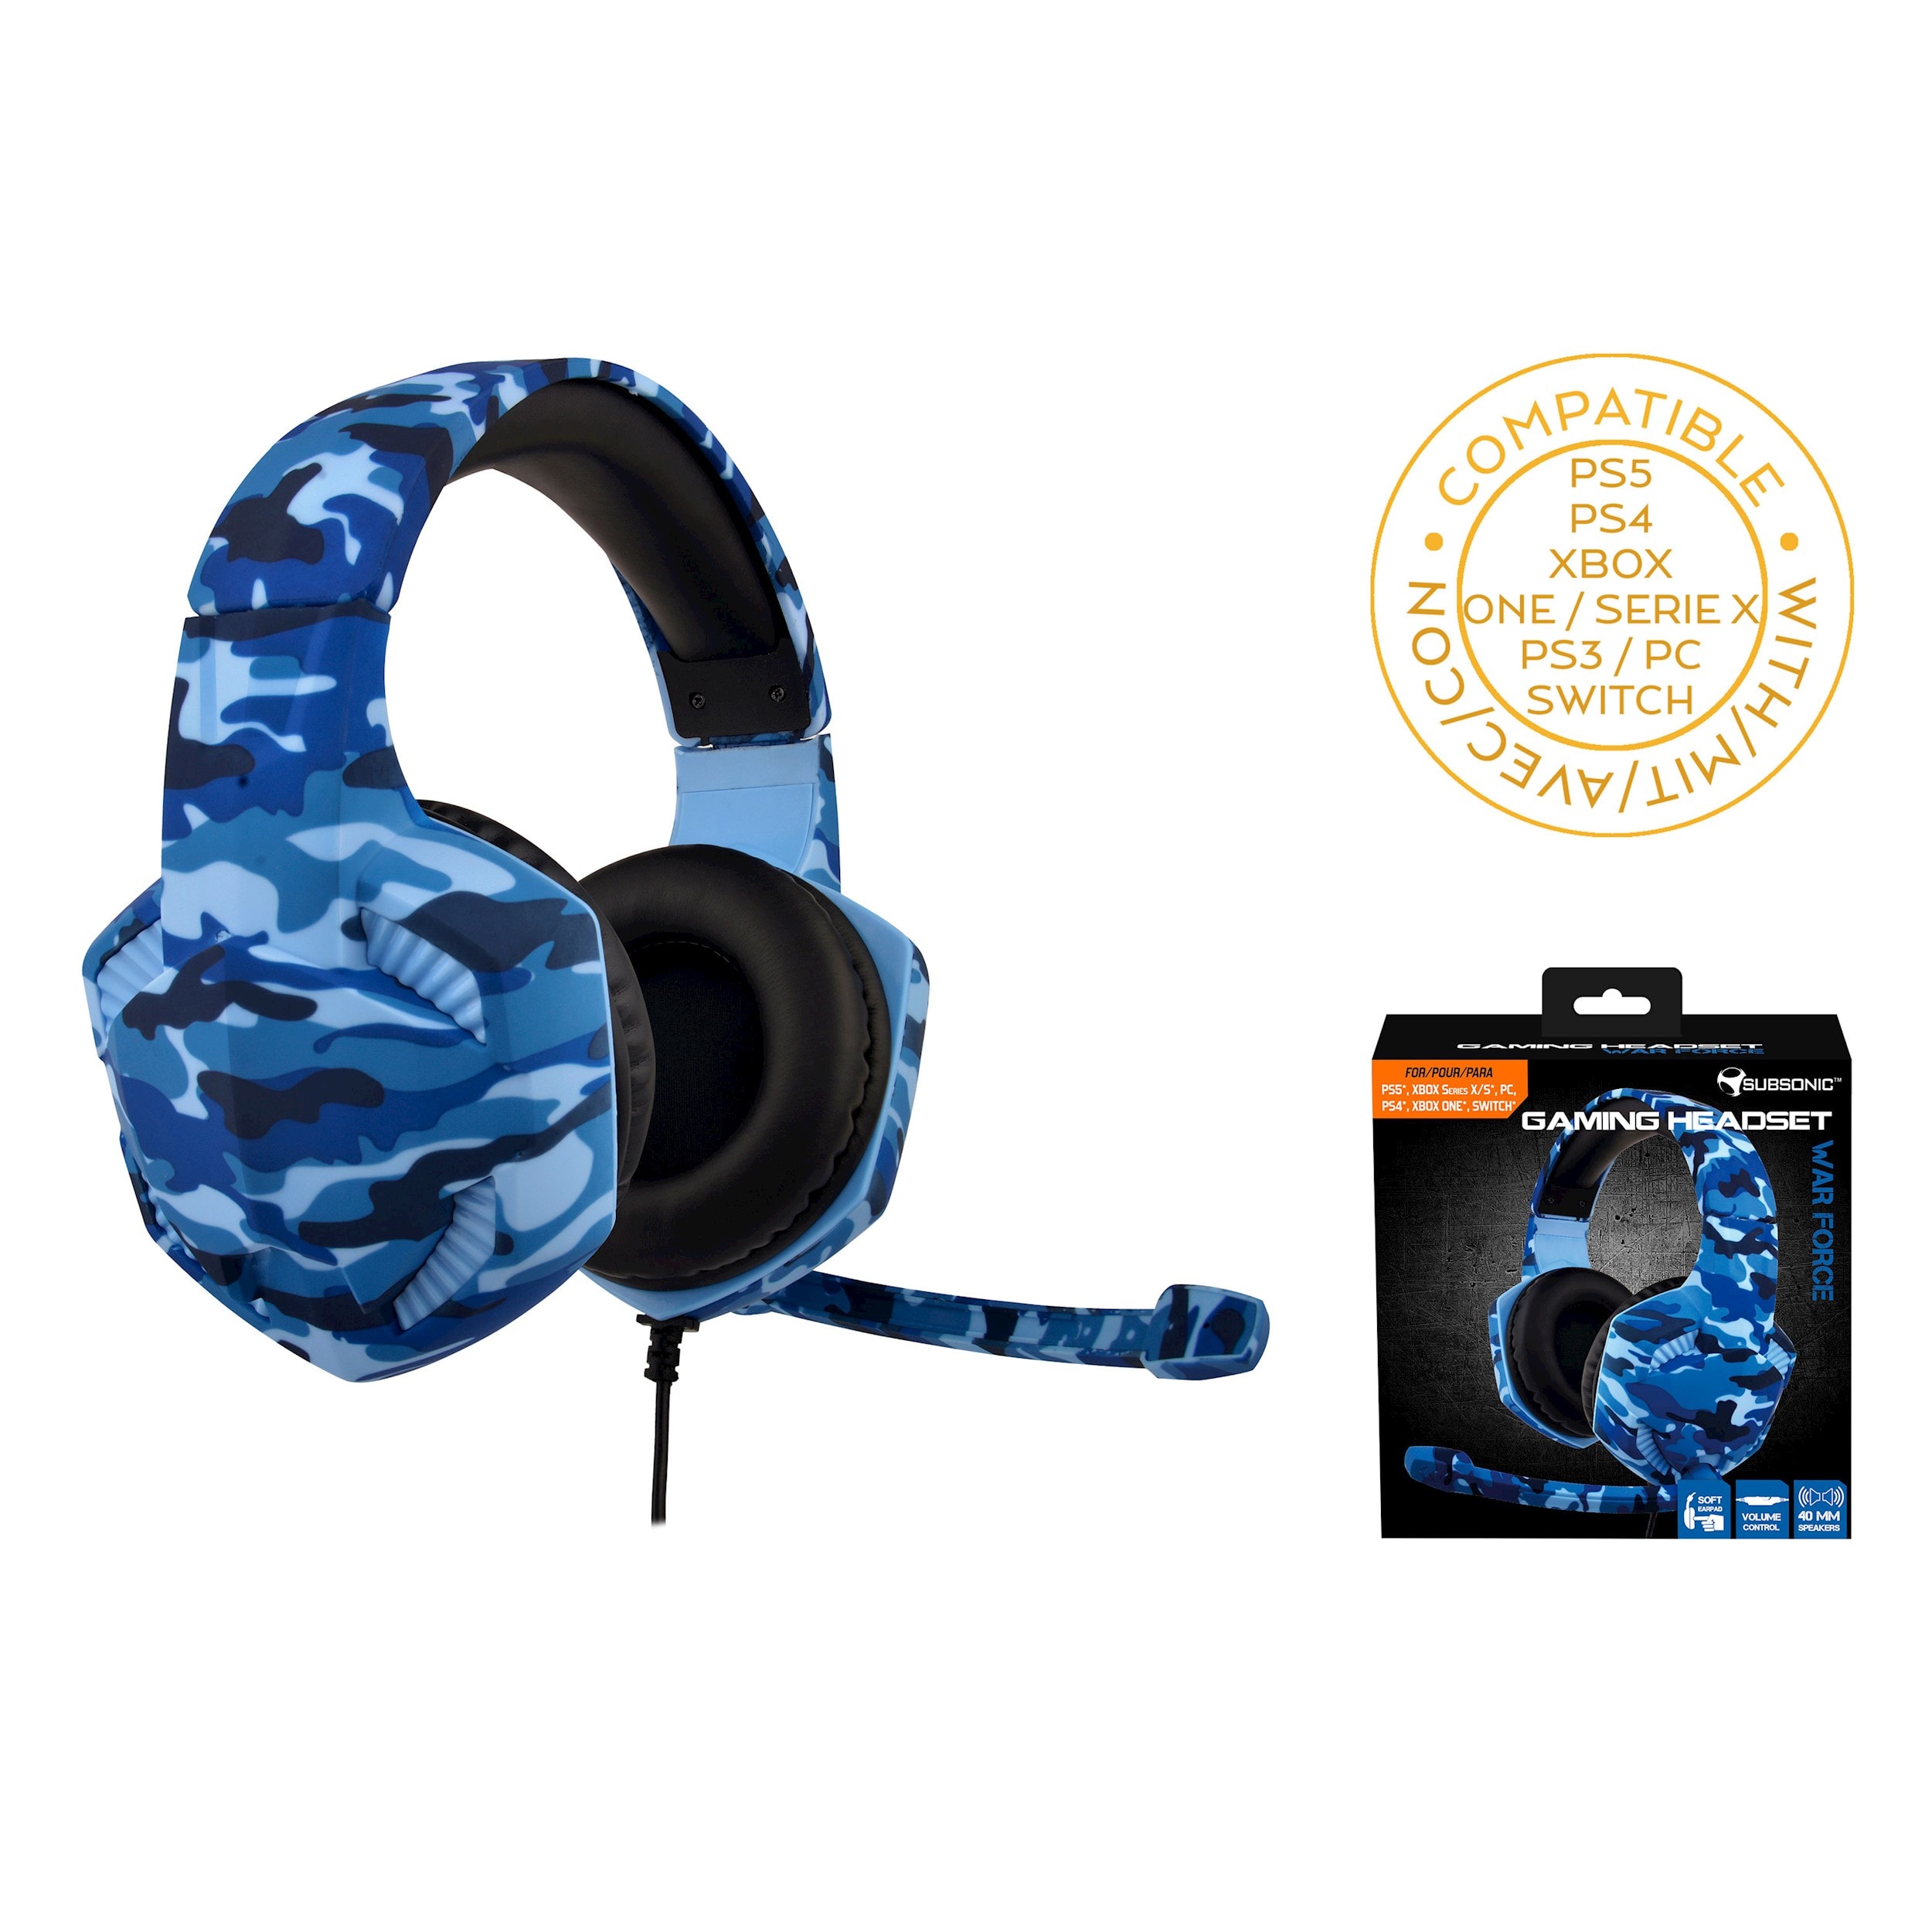 Casque gaming war force avec micro pour ps5 ps4 xnox serie x/s